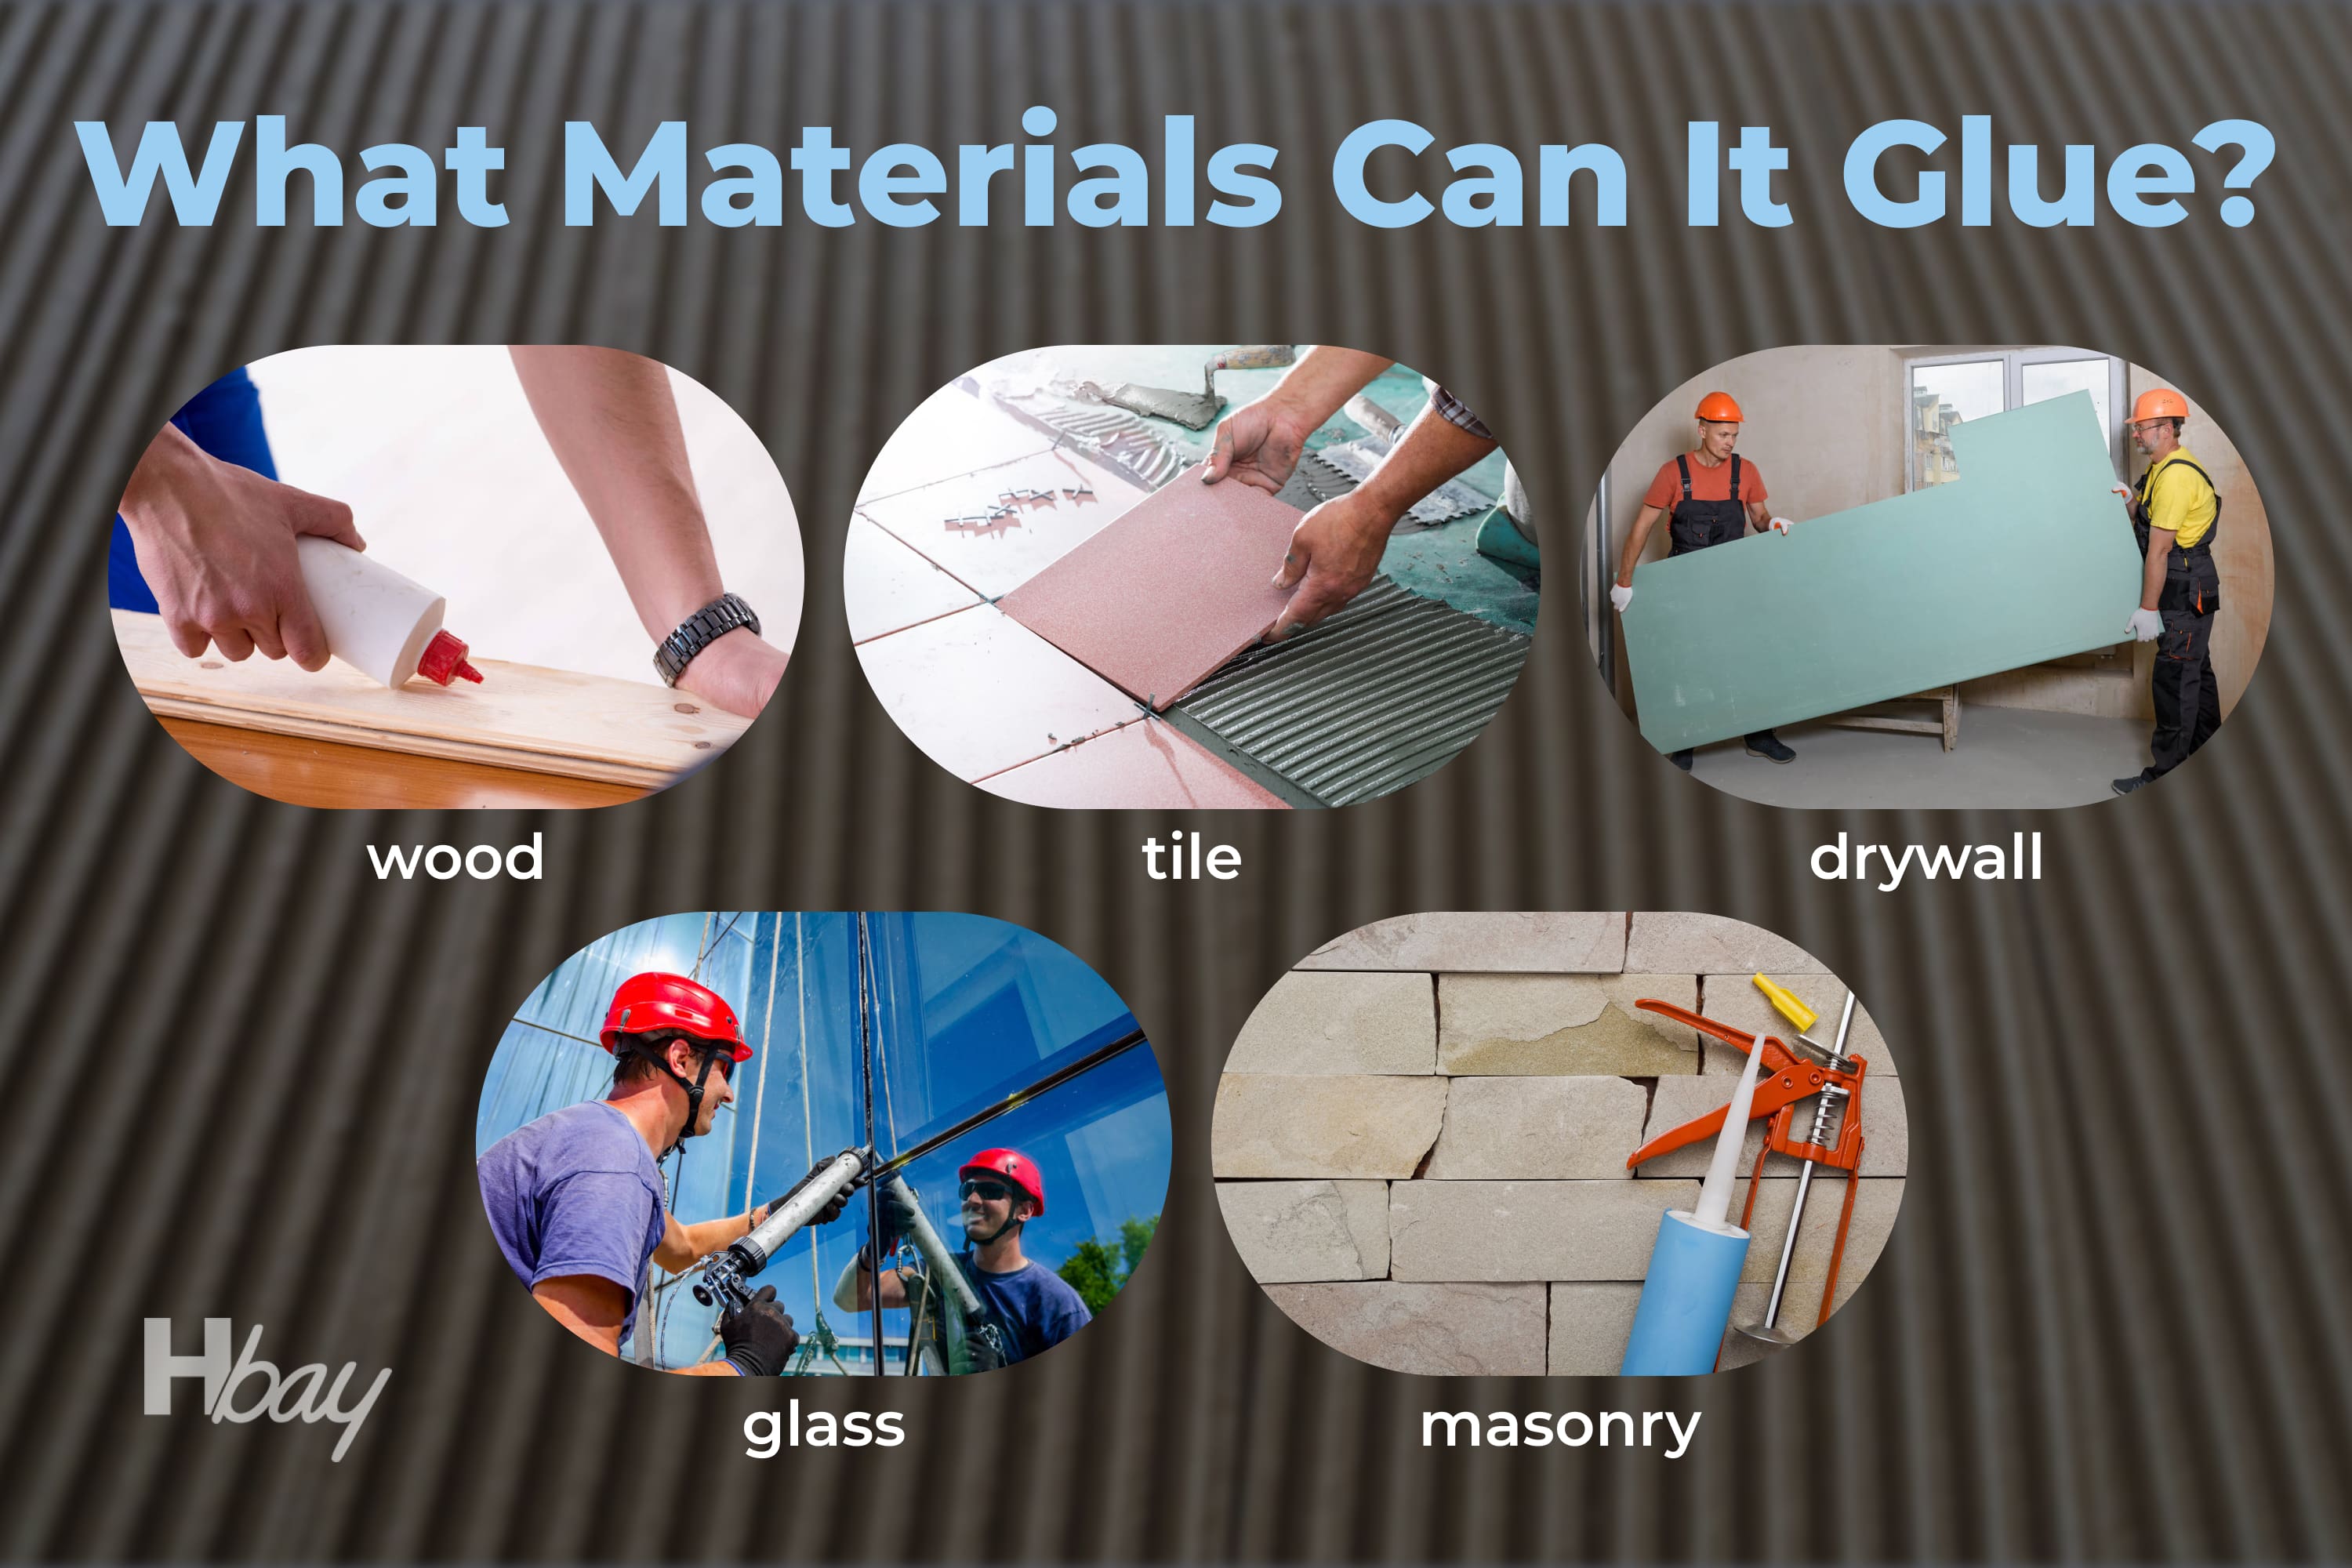 What materials can it glue